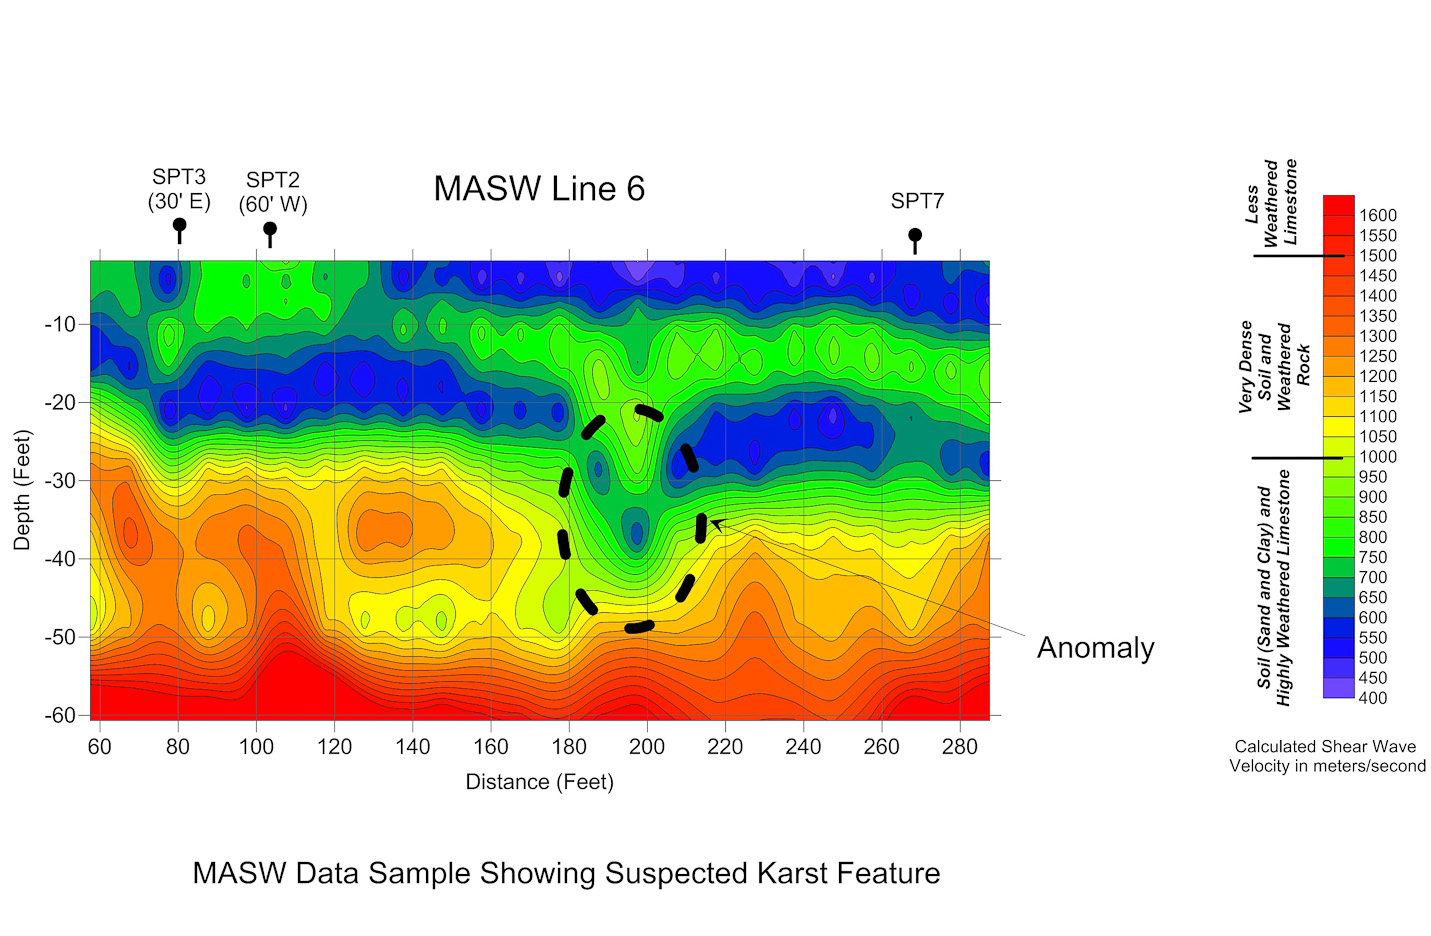 MASW Data Sample Showing Suspected Karst Feature